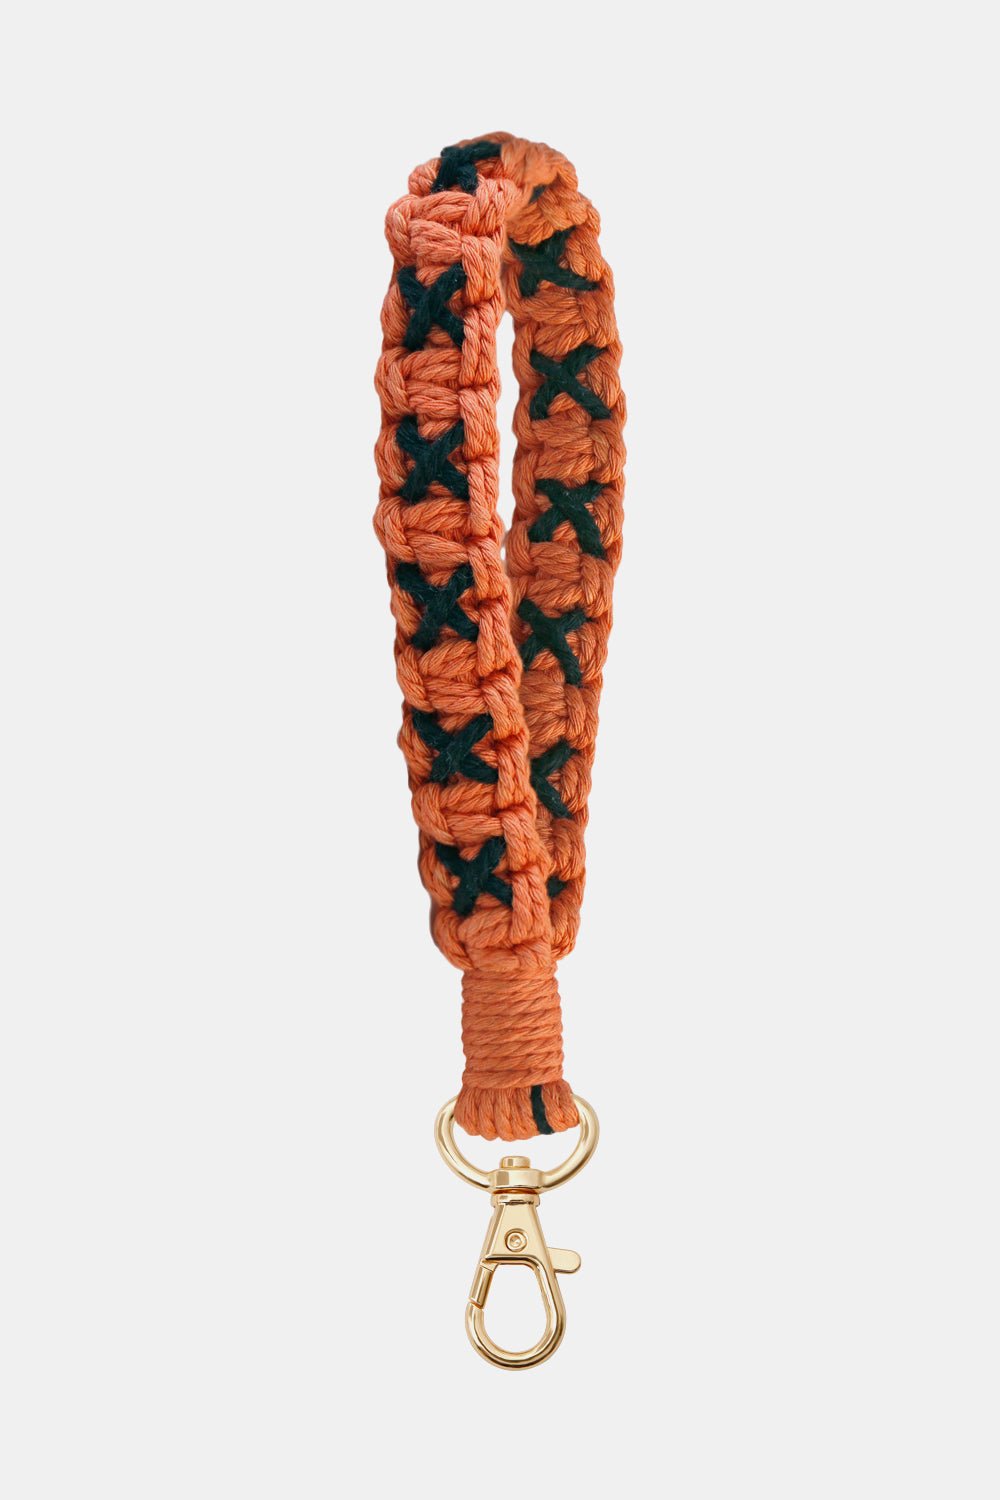 Contrast Macrame Key Chain - GemThreads Boutique